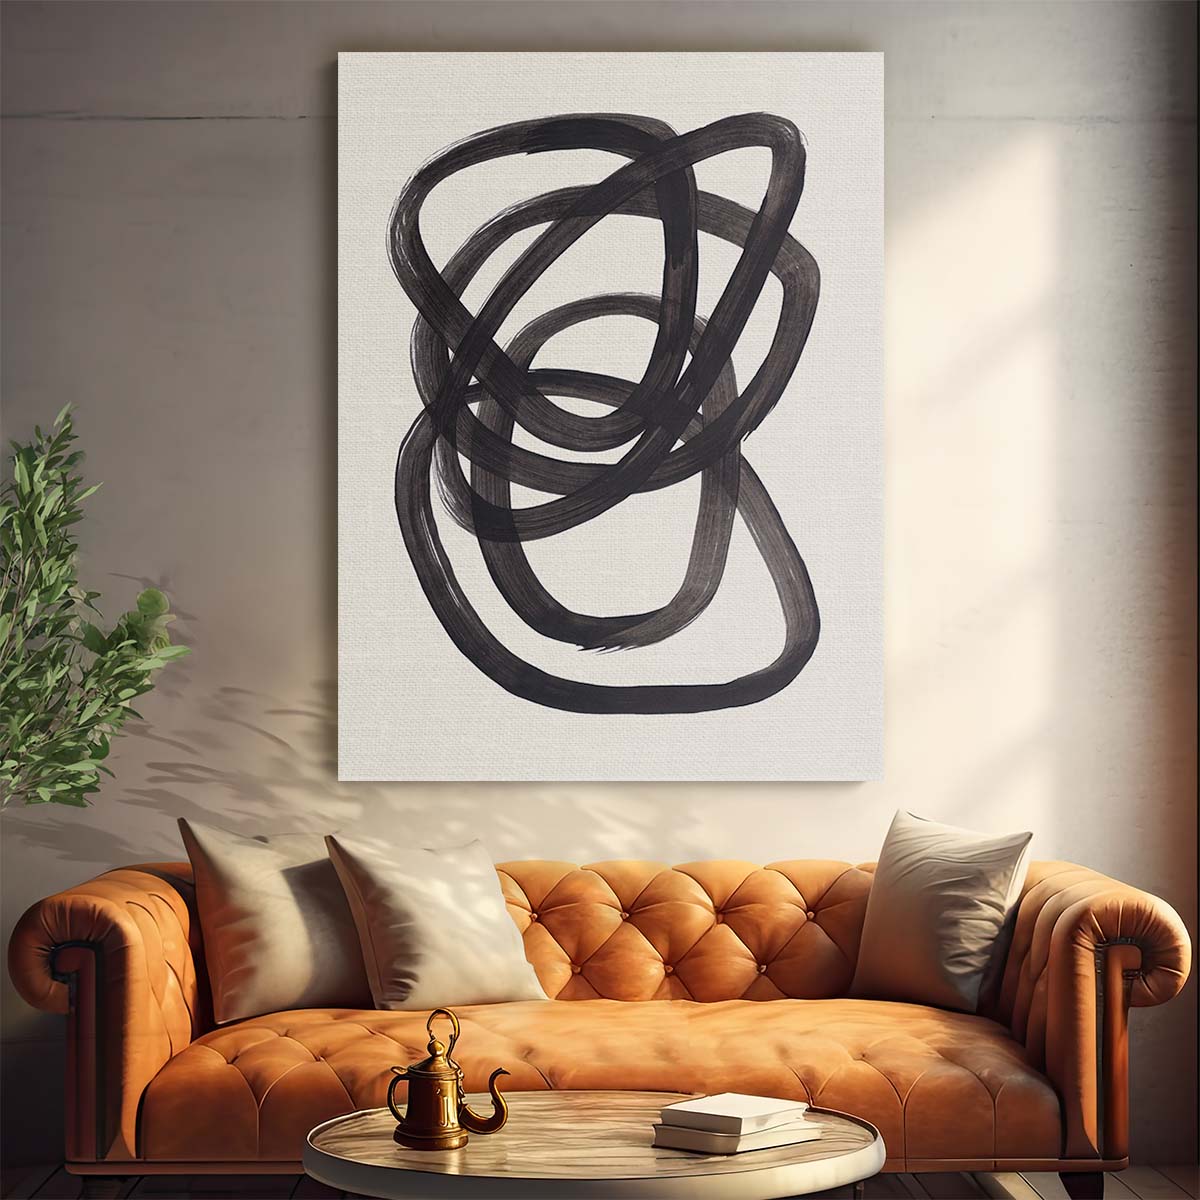 Abstract Geometric Illustration Ink Spiral Black Rings Poster by Luxuriance Designs, made in USA